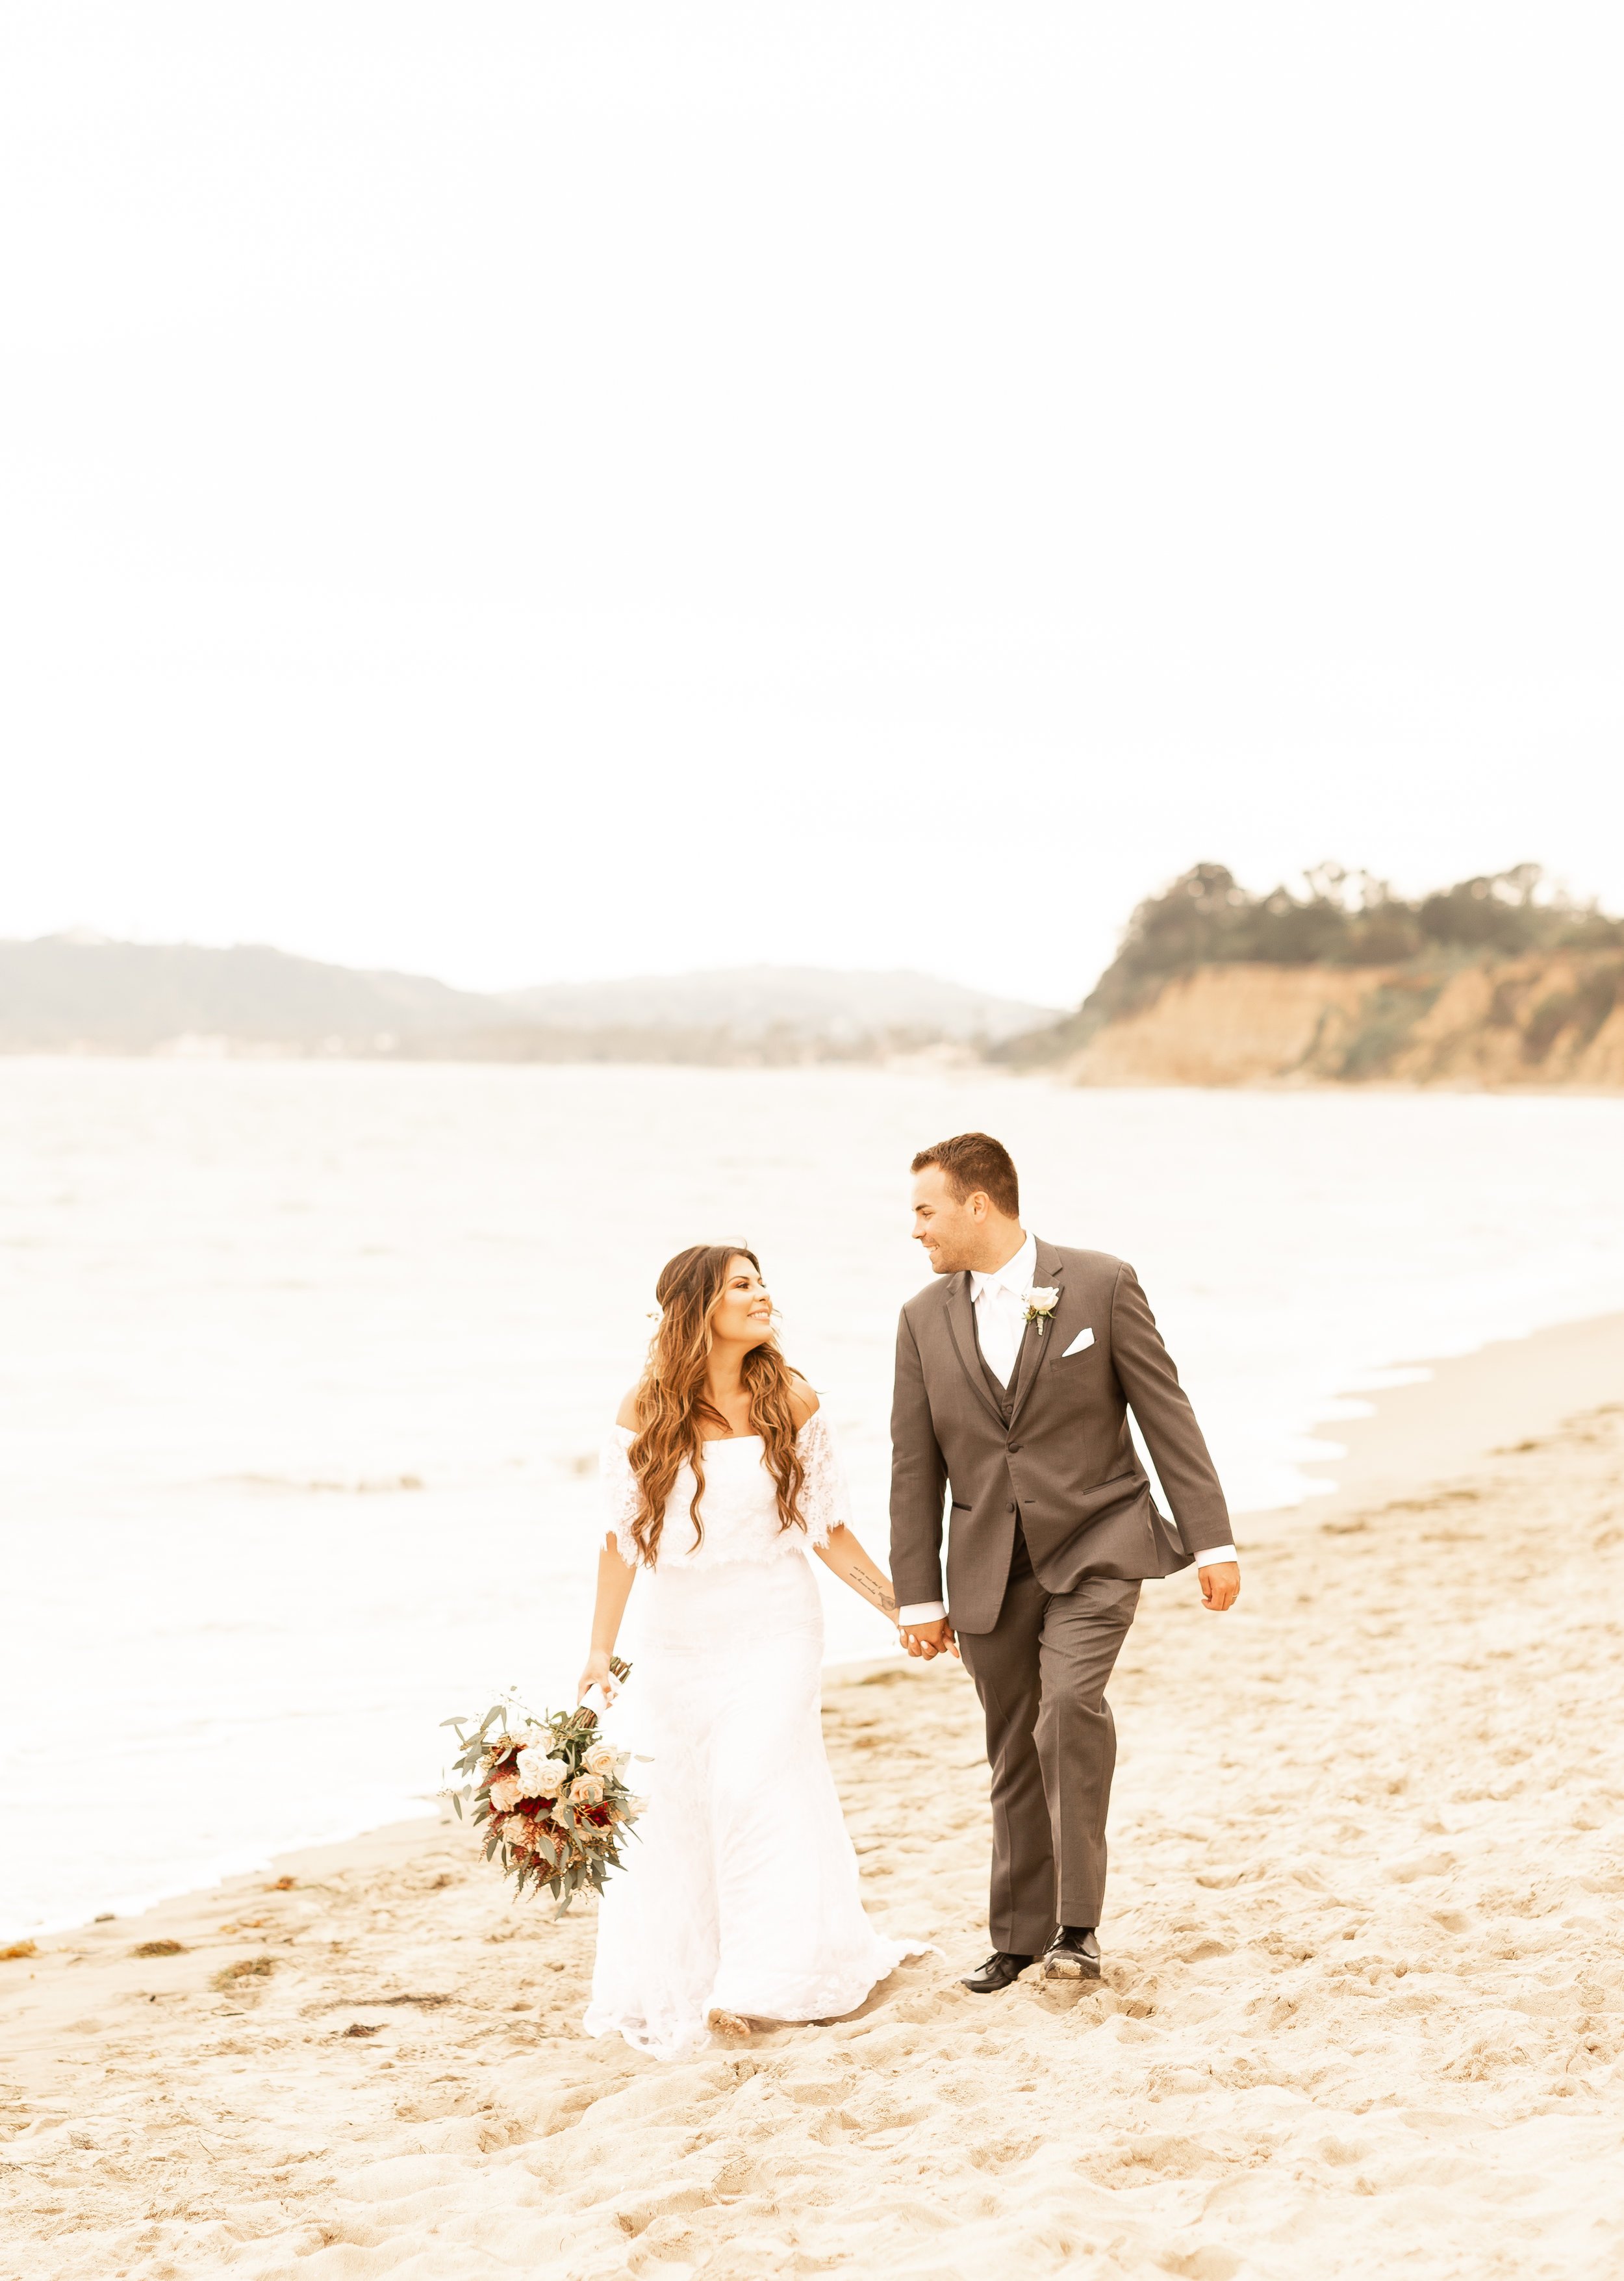 www.santabarbarawedding.com | Shot By Katie Gunz | Manning Park | Santa Barbara Courthouse | Weddings by the Sea | Makeup by Raven | wedding couples portraits on beach